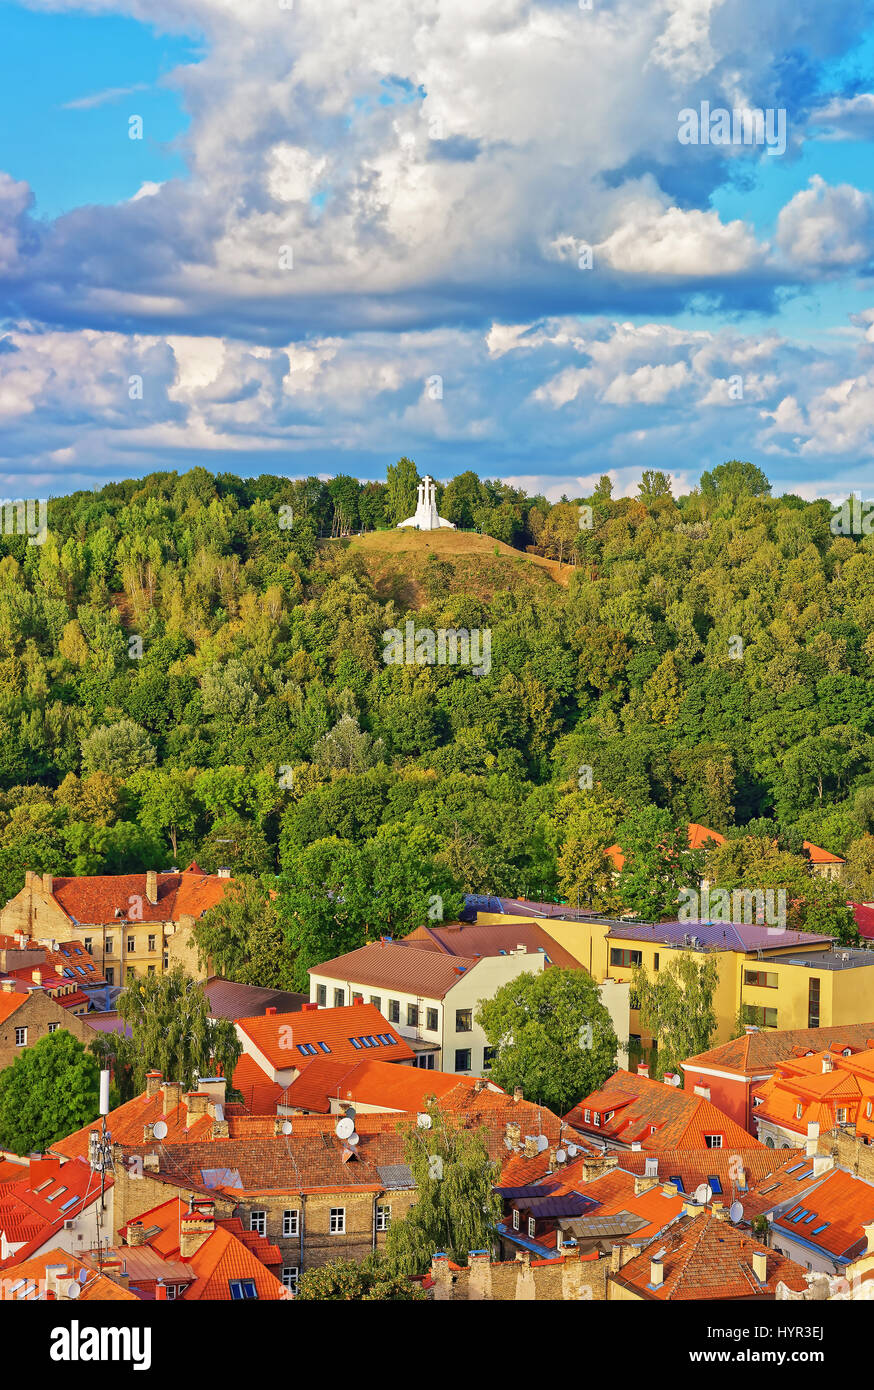 Crooked hill of Three Crosses, Vilnius, Lithuania Stock Photo